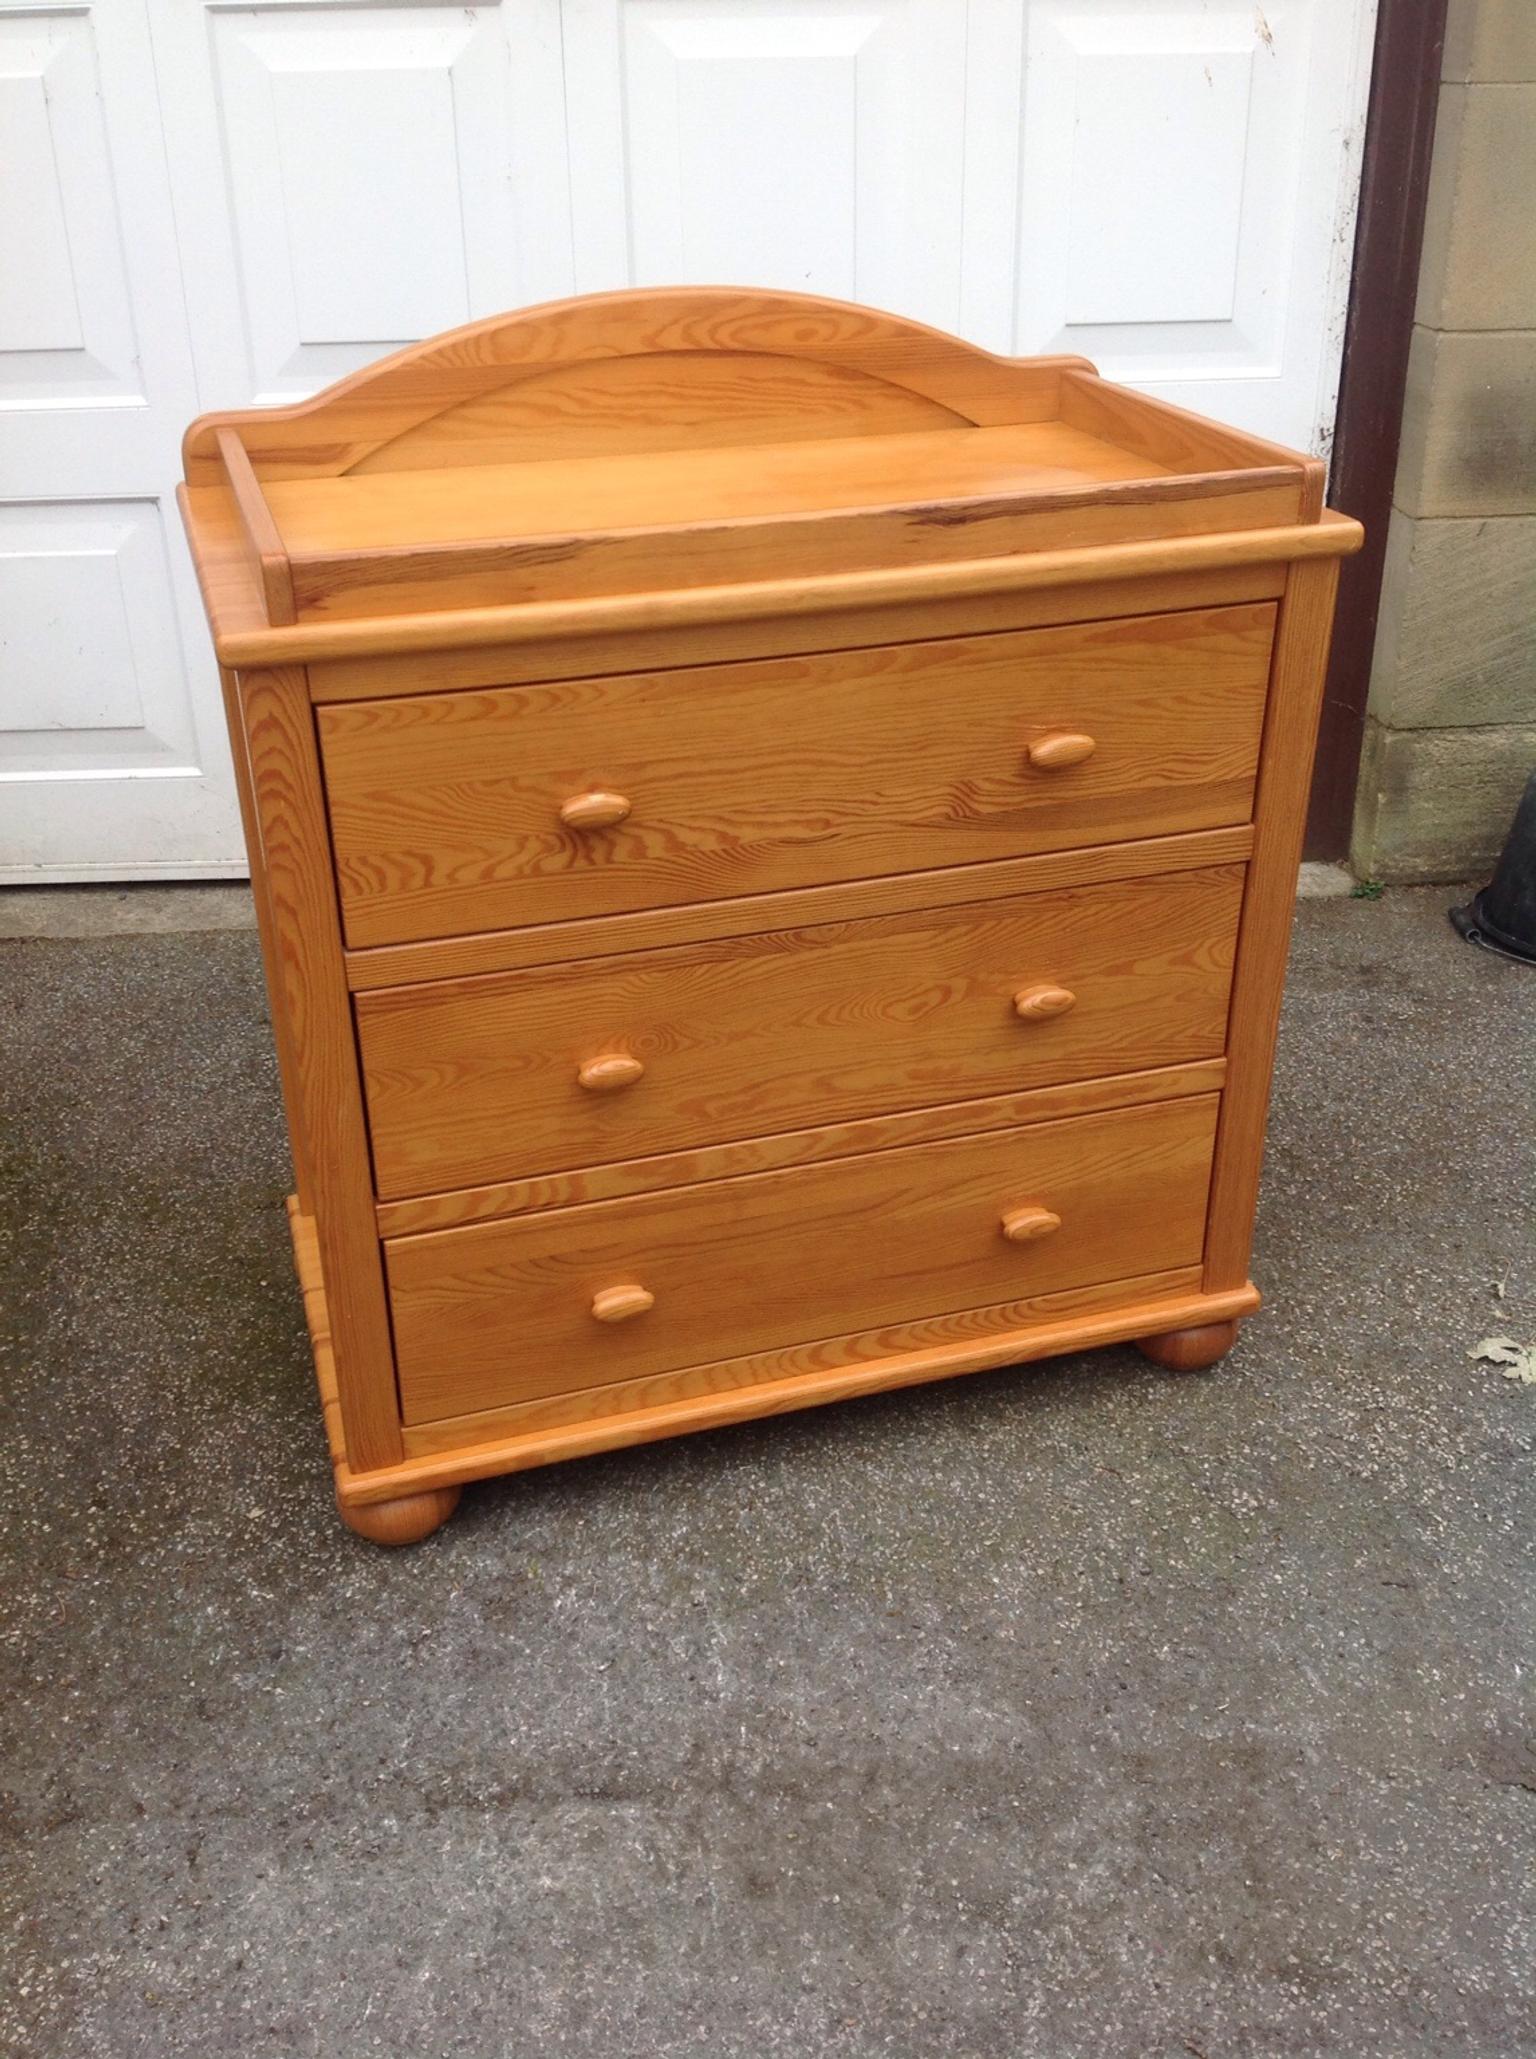 Mamas And Papas Drawers Dresser Baby Changer In Bd20 Craven For